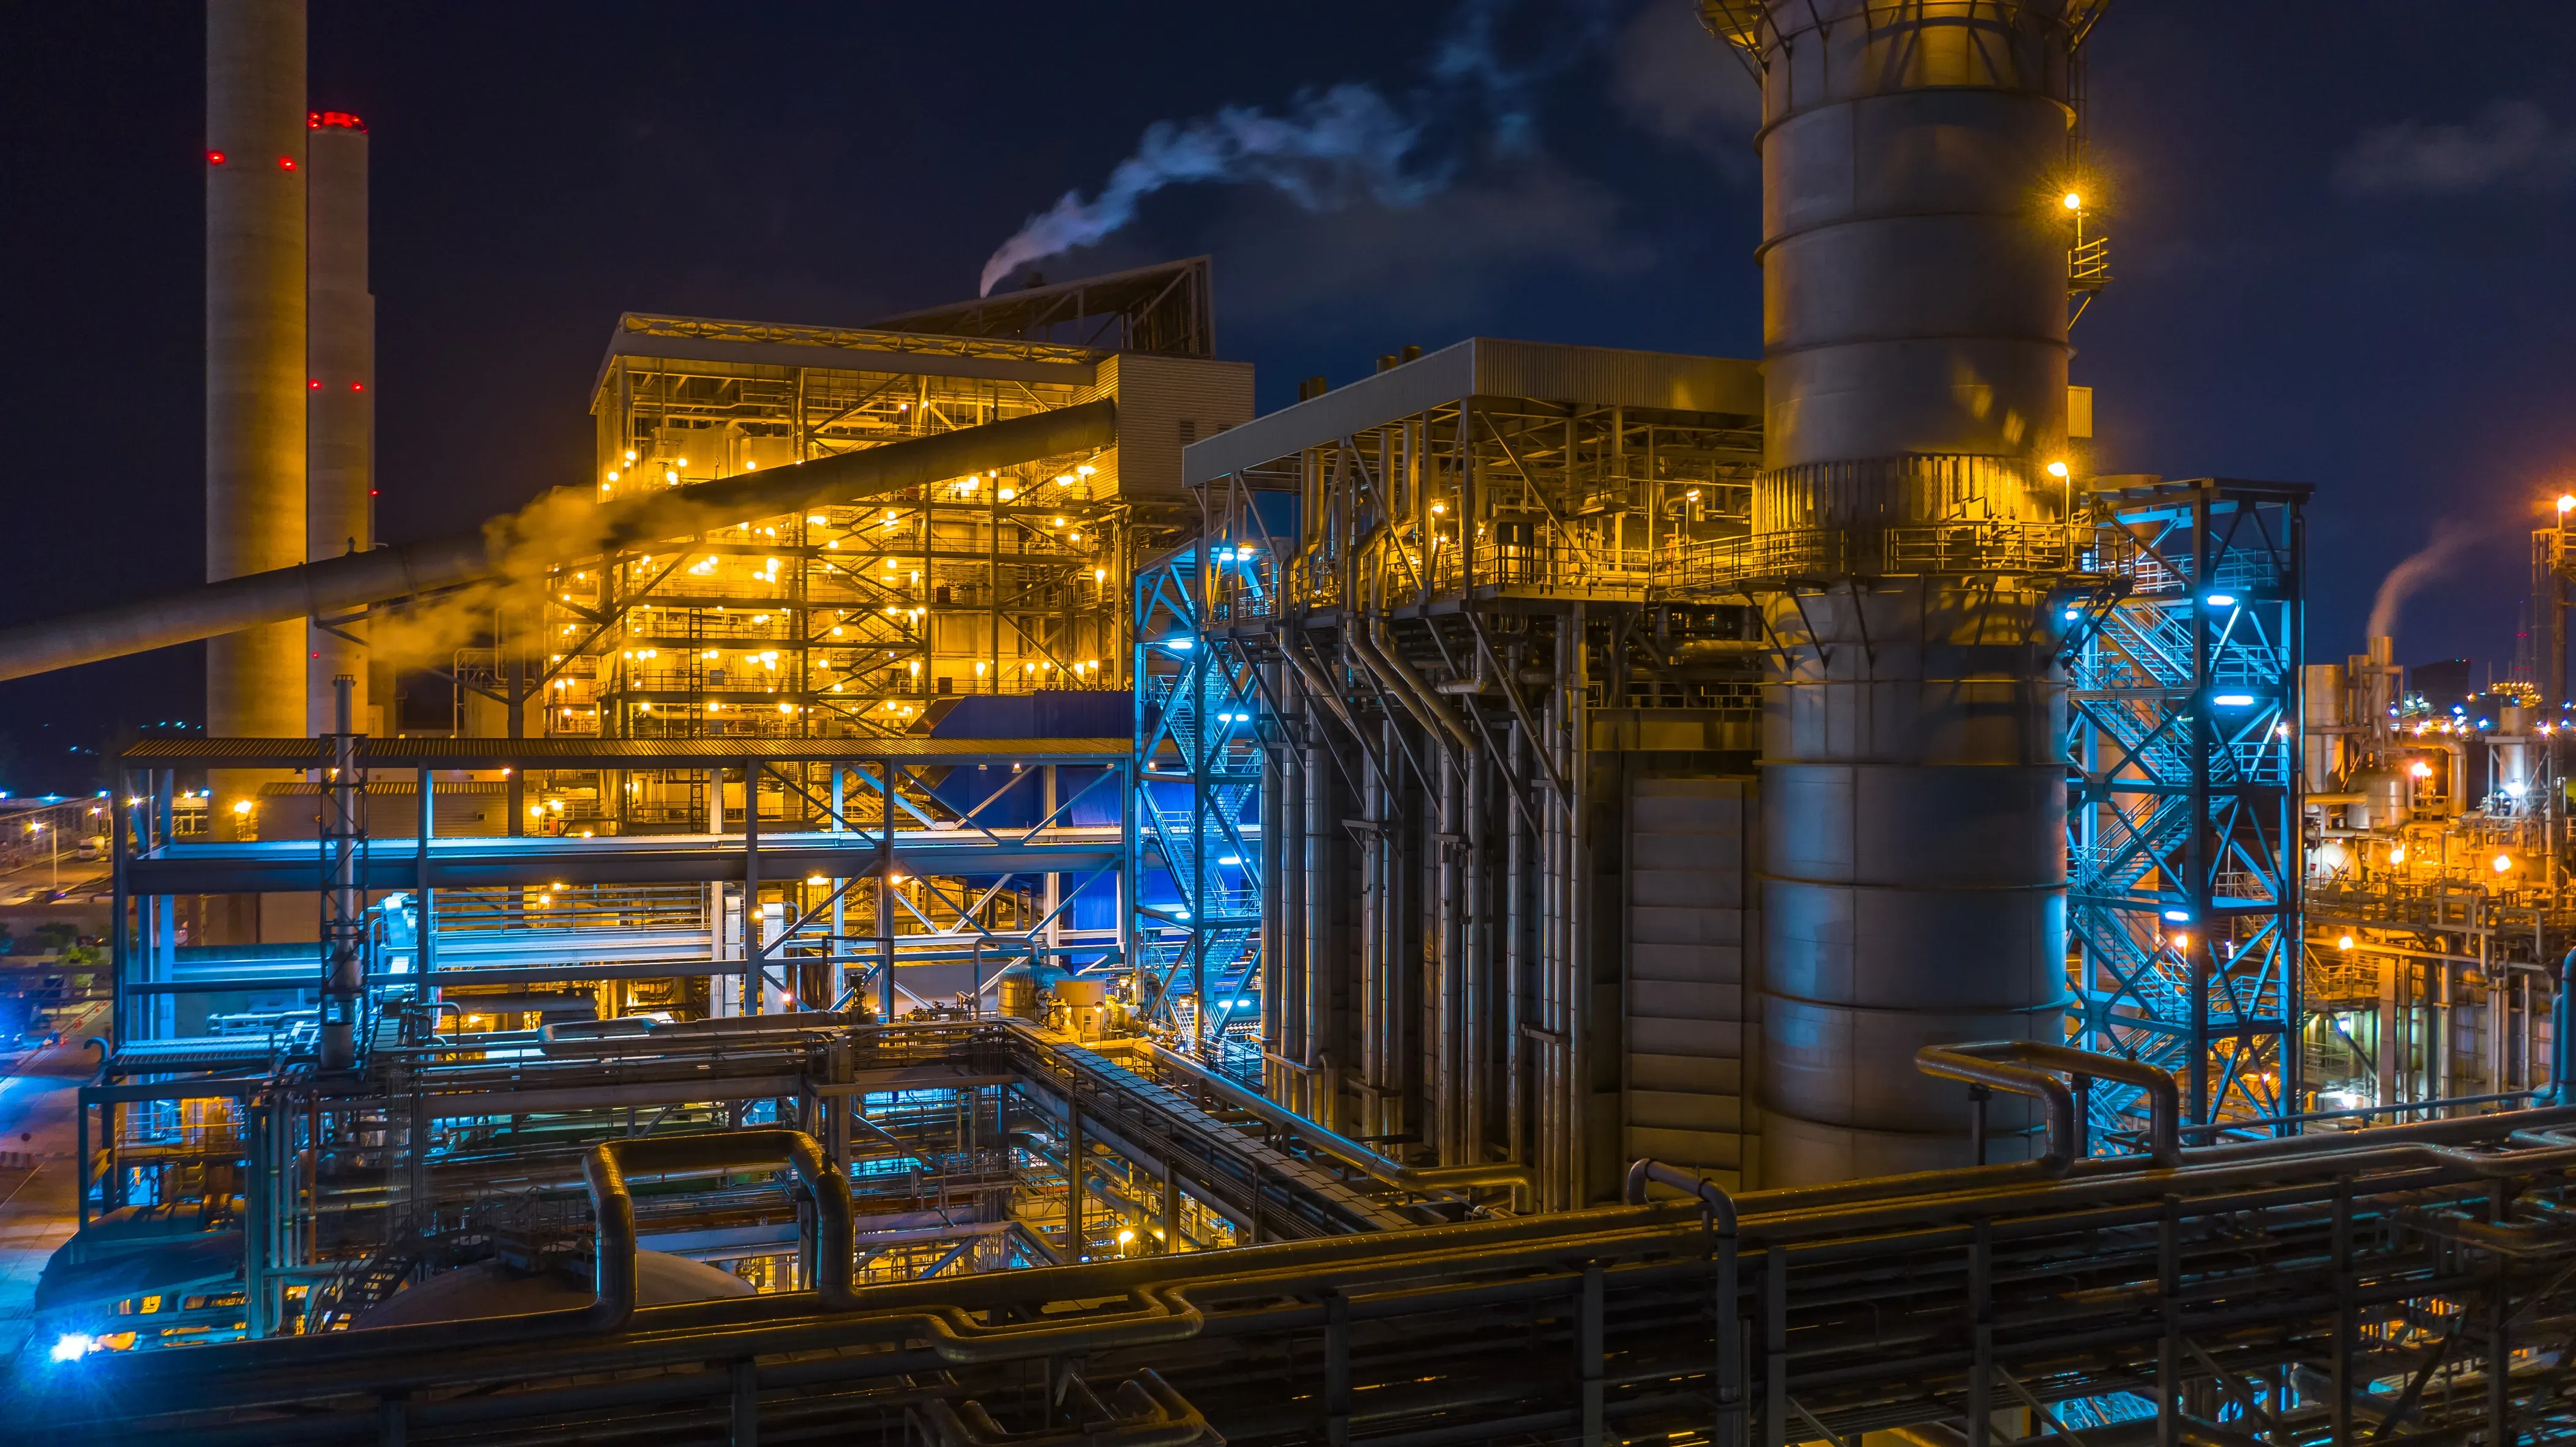 Can Cogeneration Pave the Way to Better Energy Efficiency?